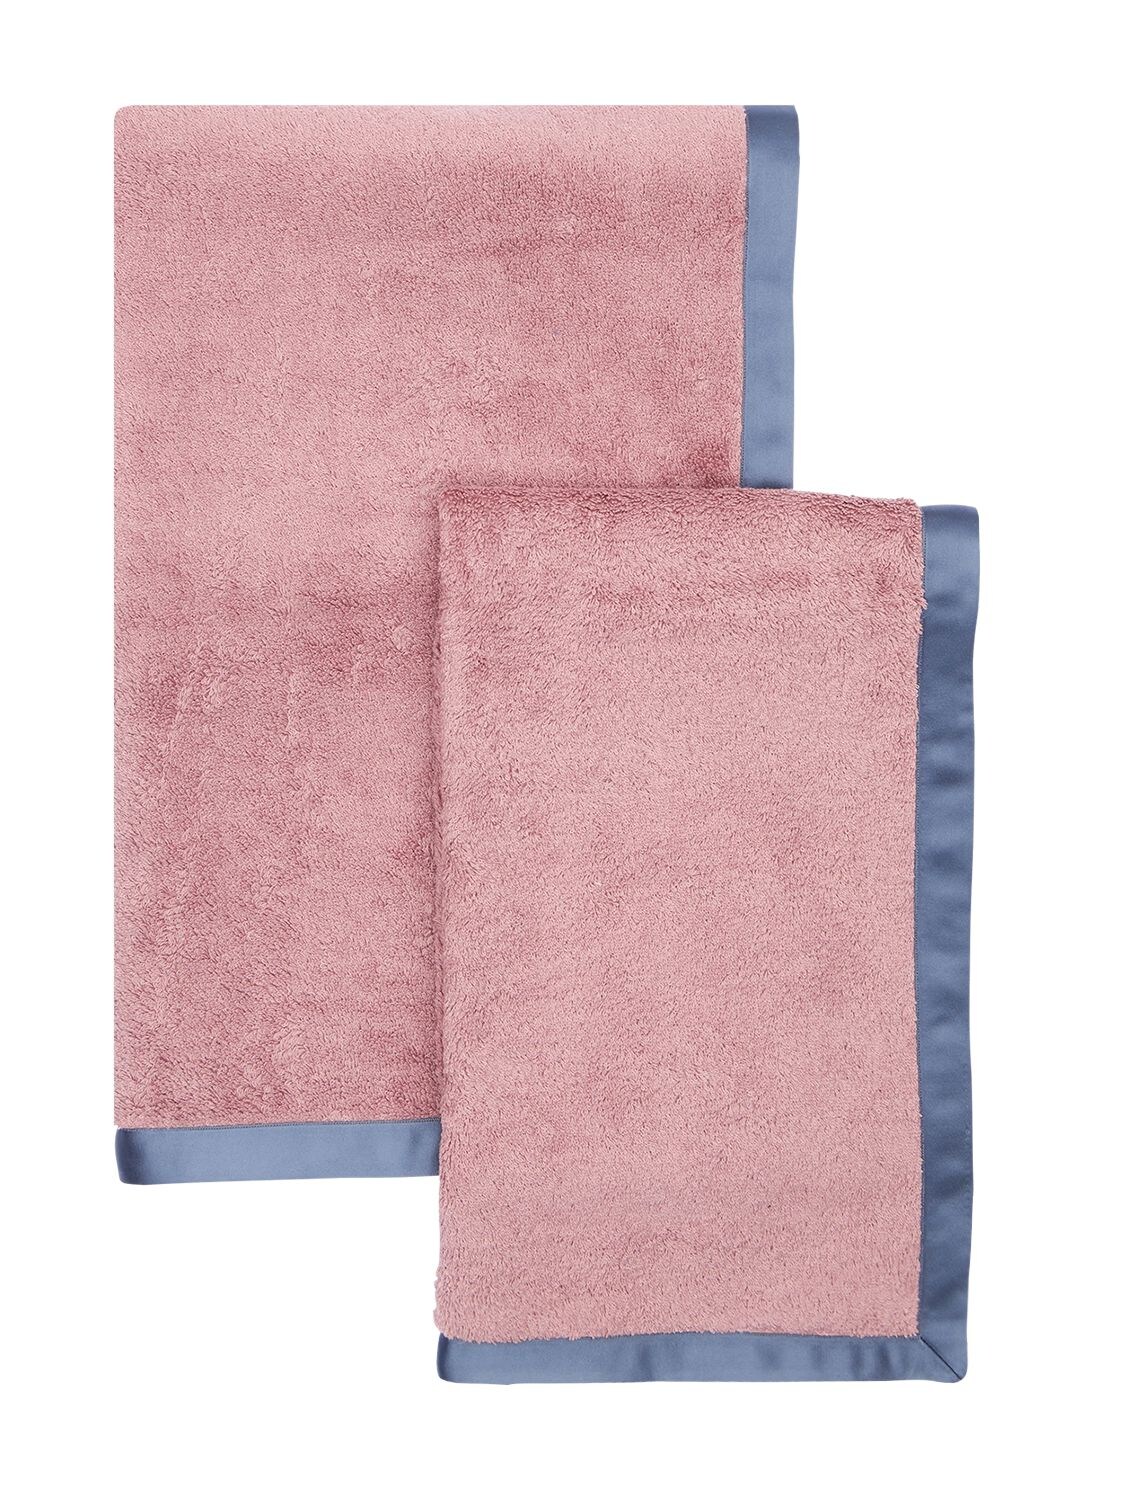 Alessandro Di Marco Set Of 2 Cotton Terrycloth Towels In Pink,grey